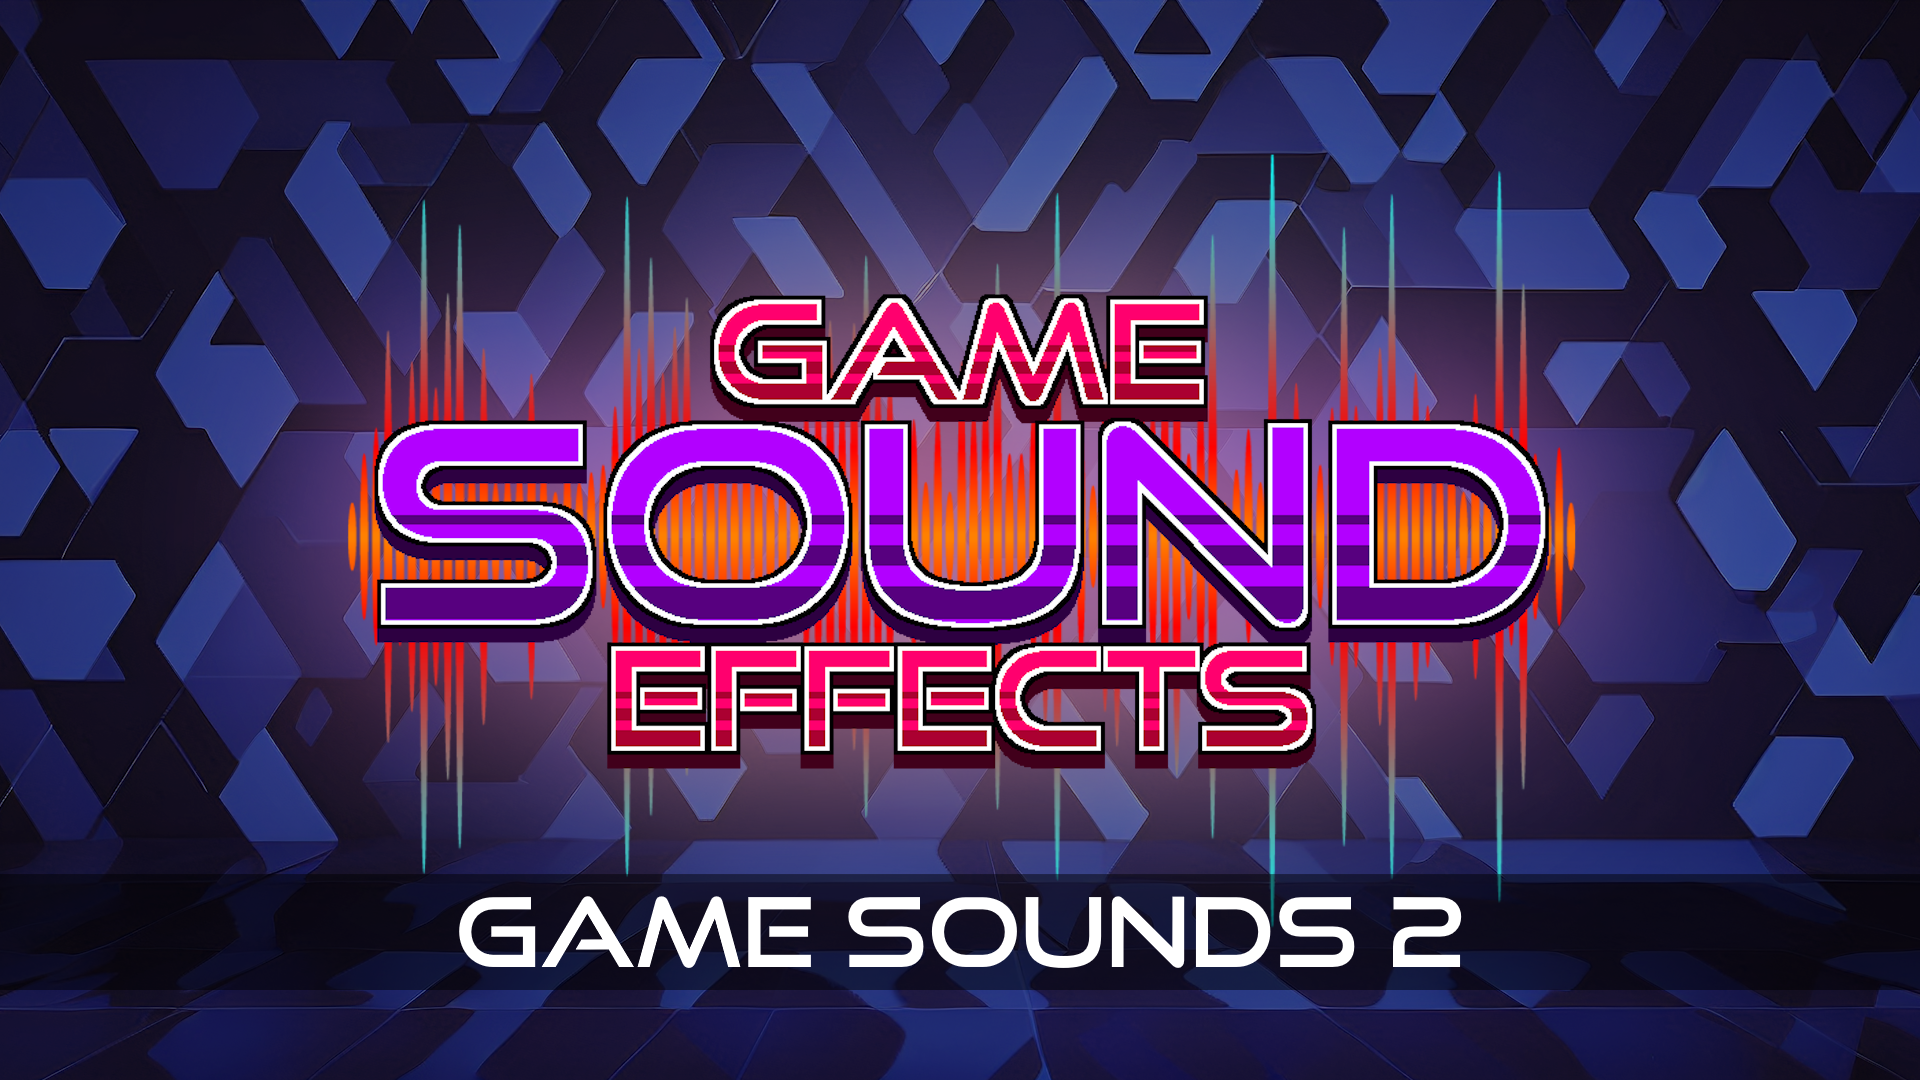 Game Sounds FX - Pack I by ELV Games